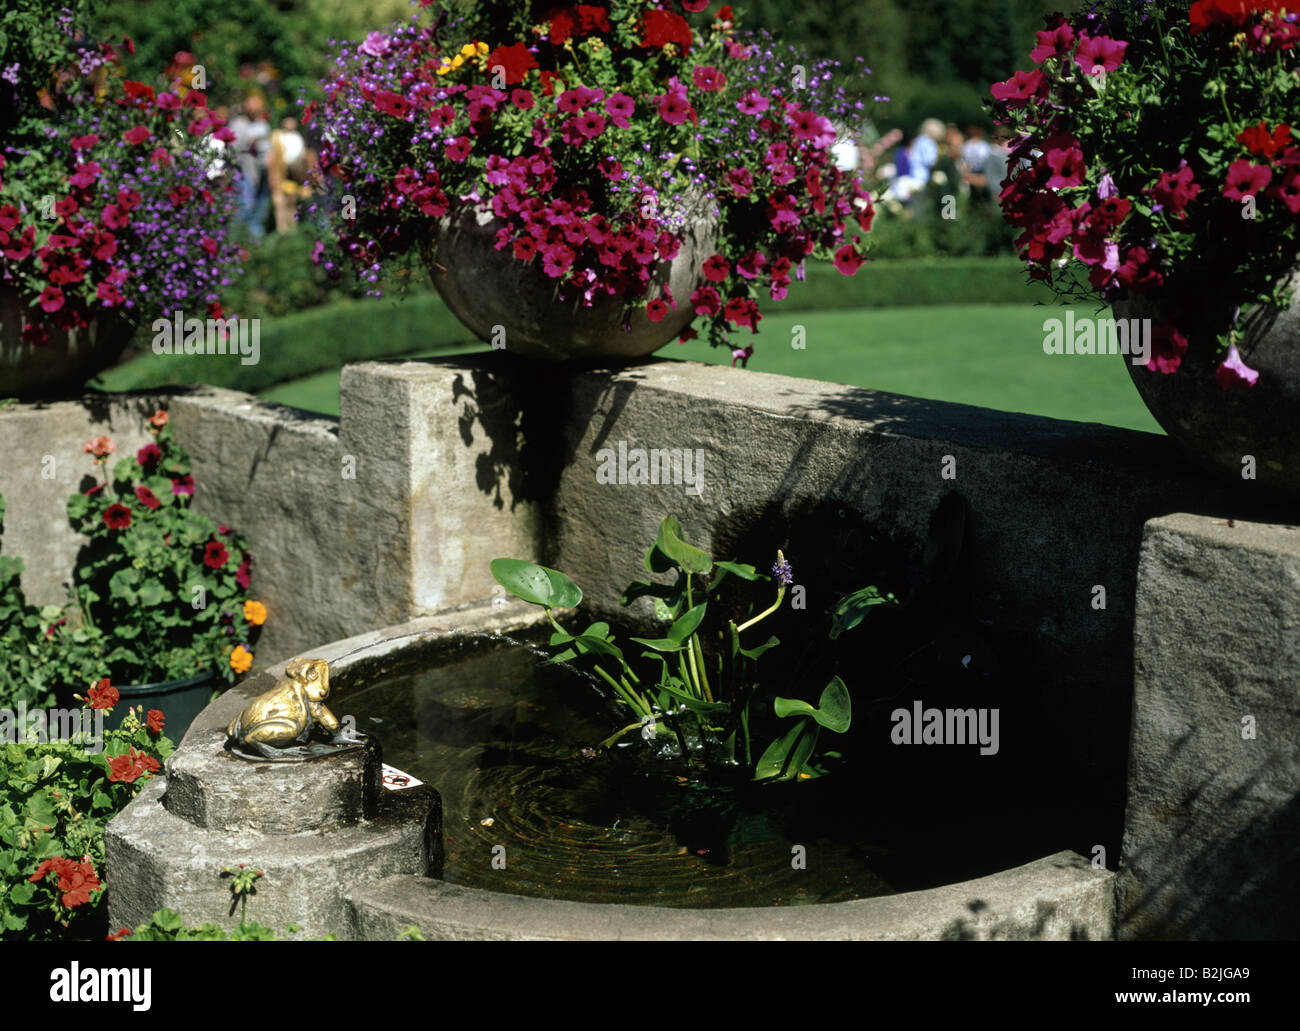 Butchart Gardens, Victoria Small fountain at entrance to Rose Garden Flowers in pots VANCOUVER ISLAND BRITISH COLUMBIA CANADA Stock Photo